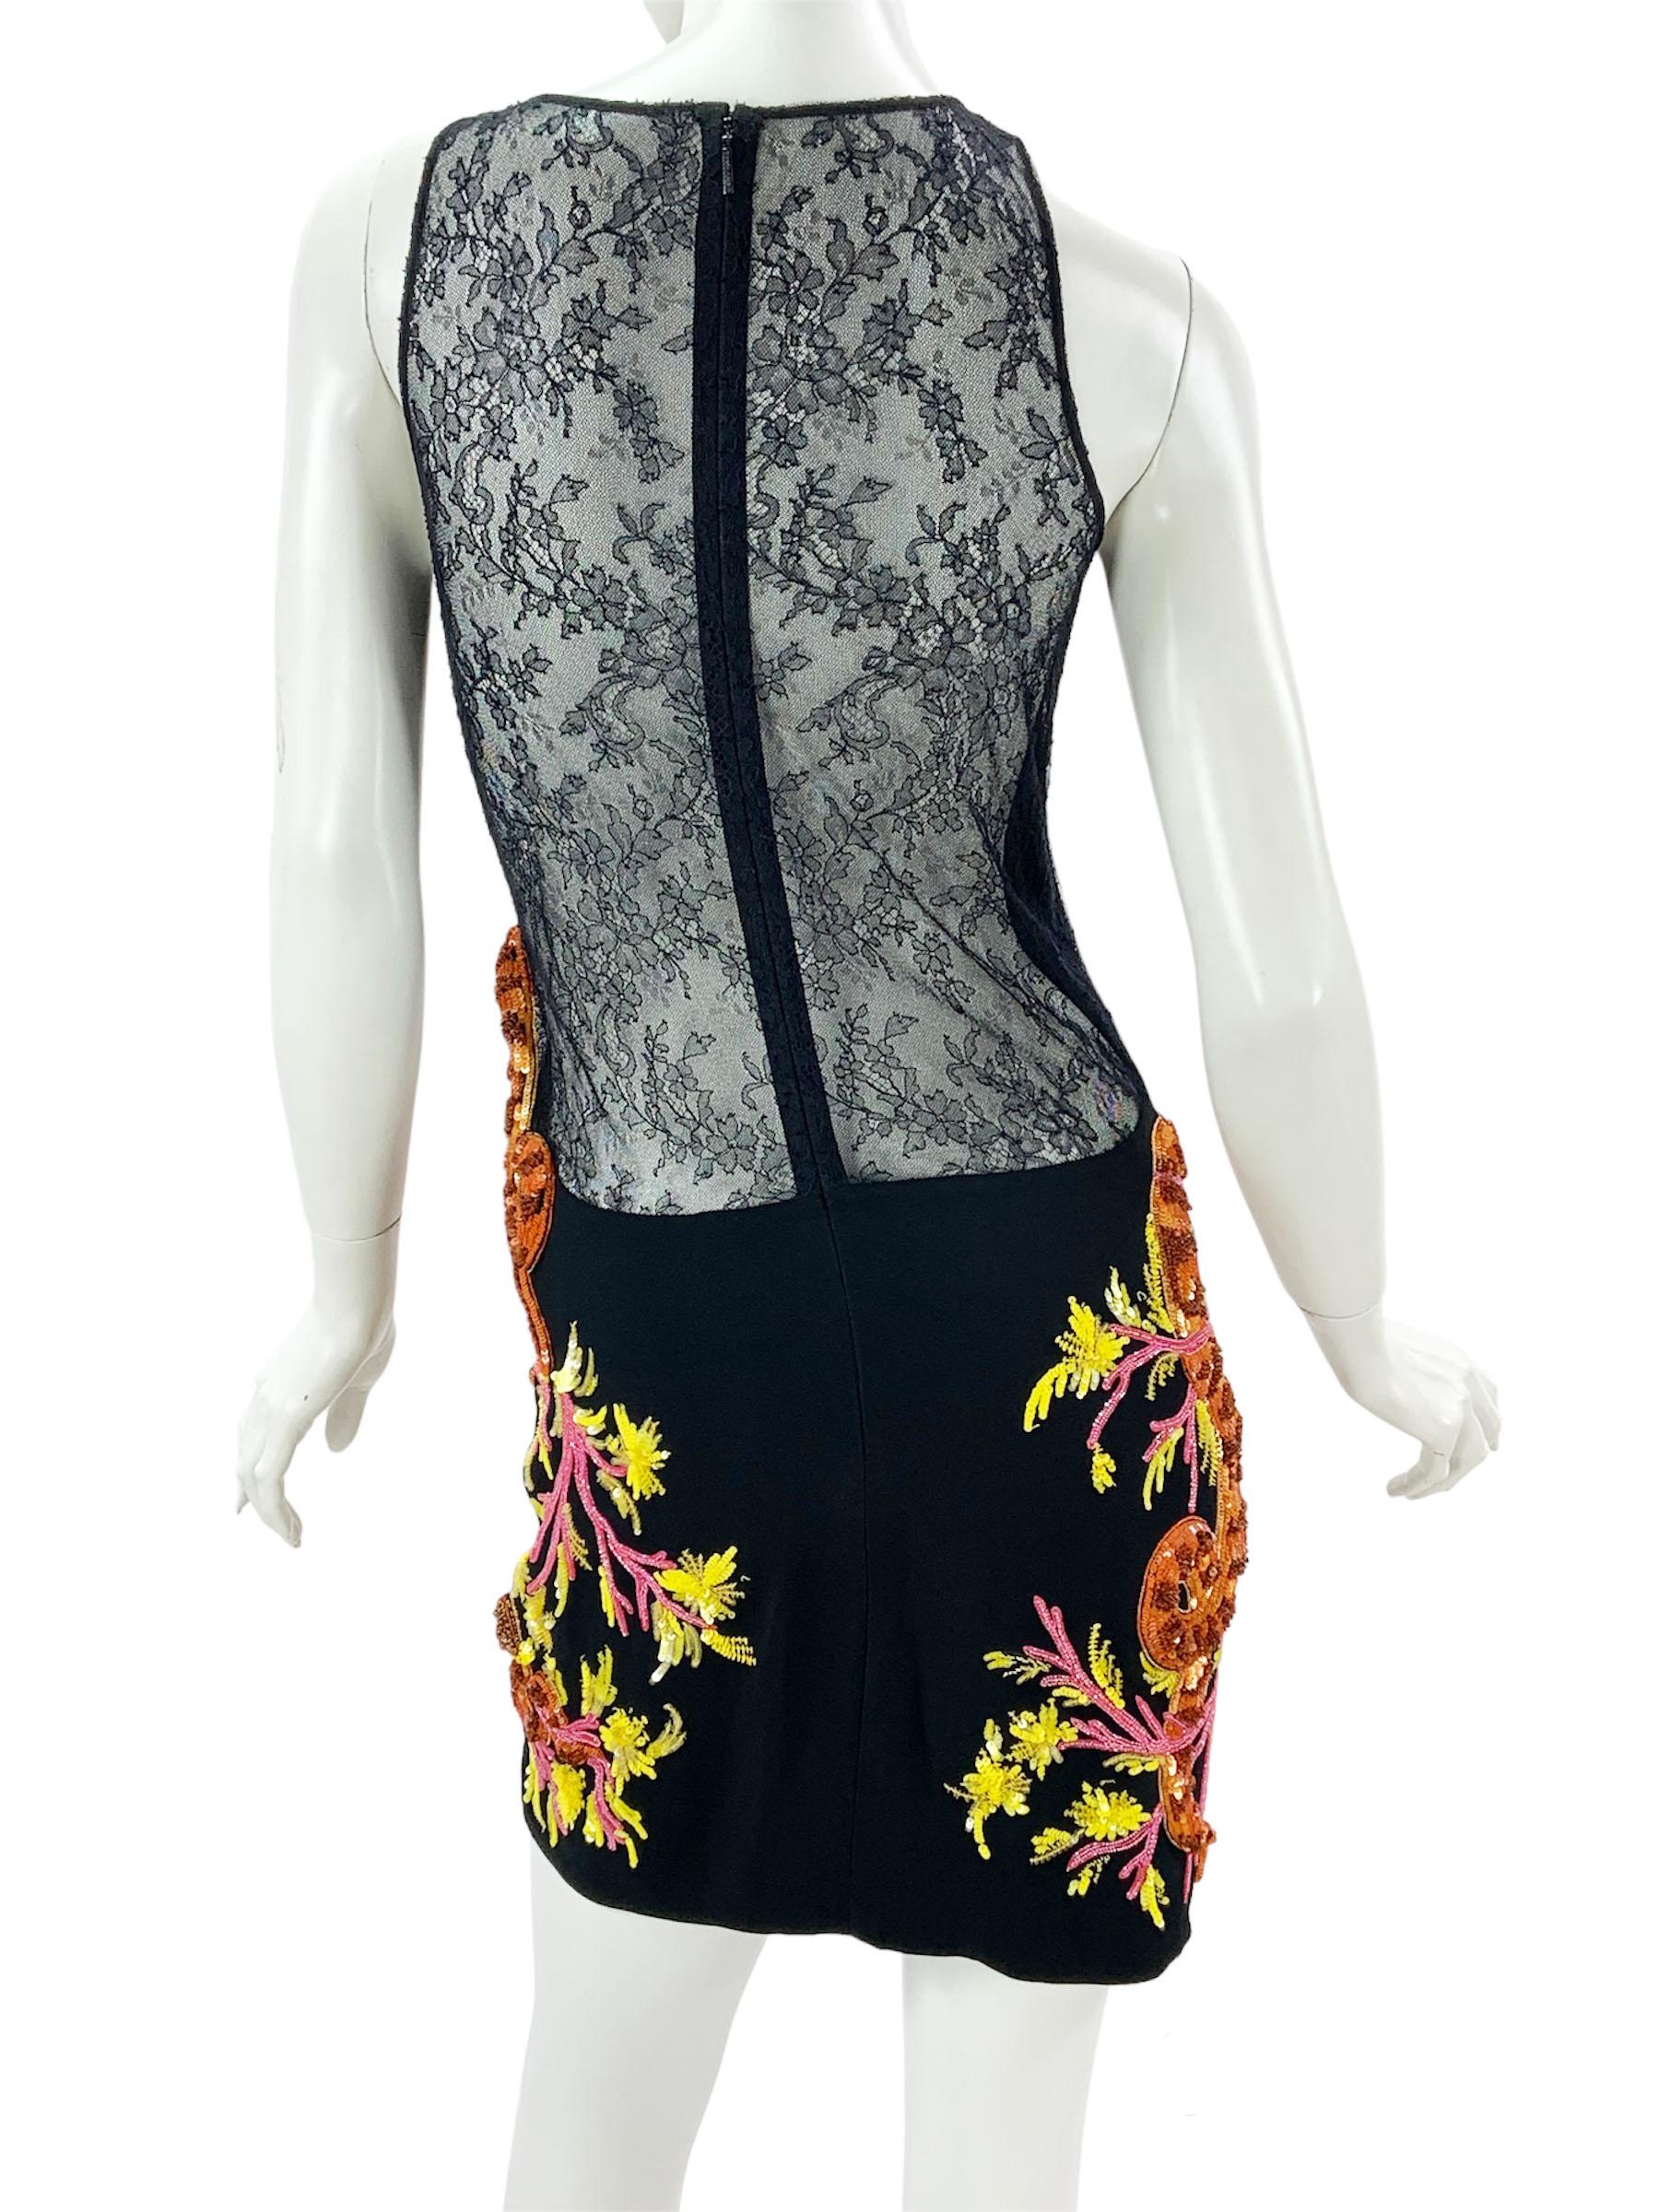 New Roberto Cavalli 3-D Snake Corals Embellished Lace Mini Dress Italian 38, 40 For Sale 2